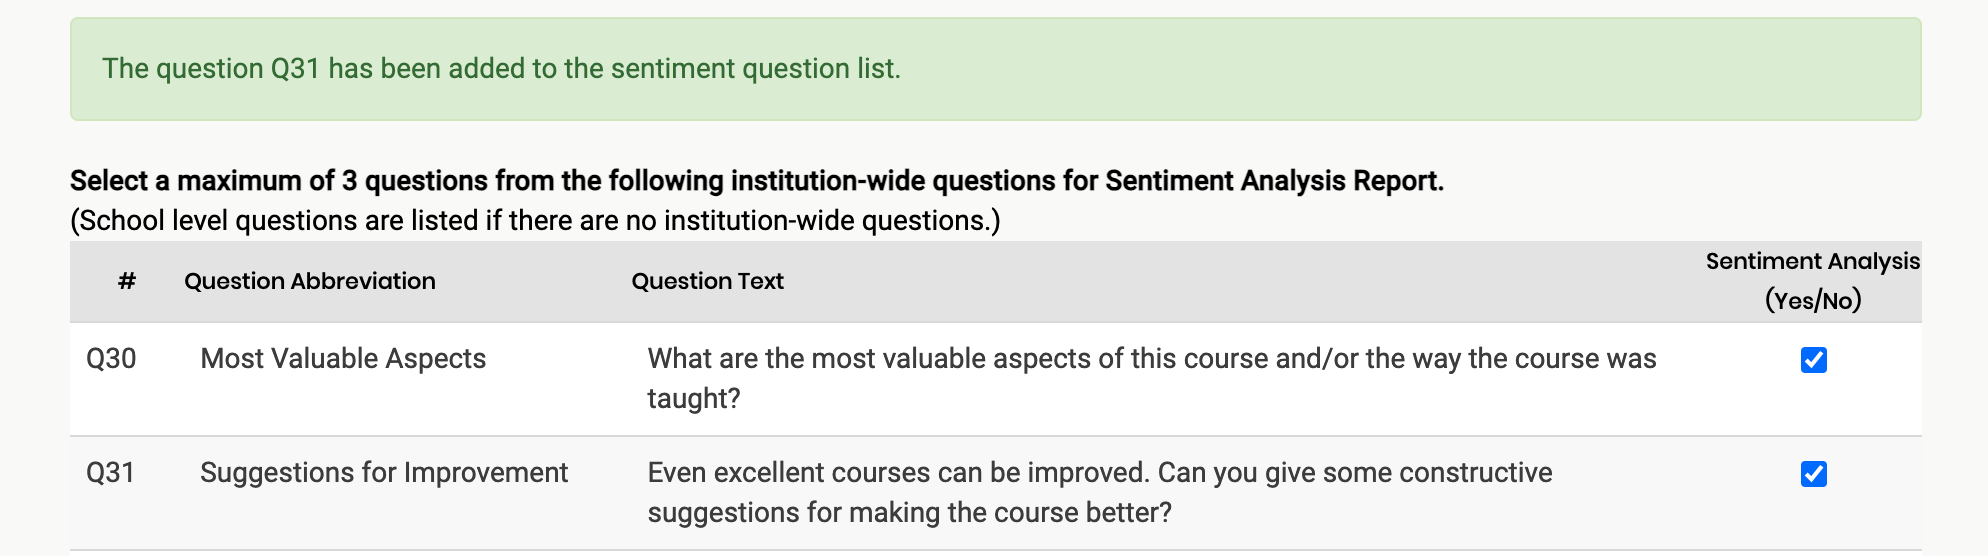 Sentiment analysis banner indicating that a question was successfully added